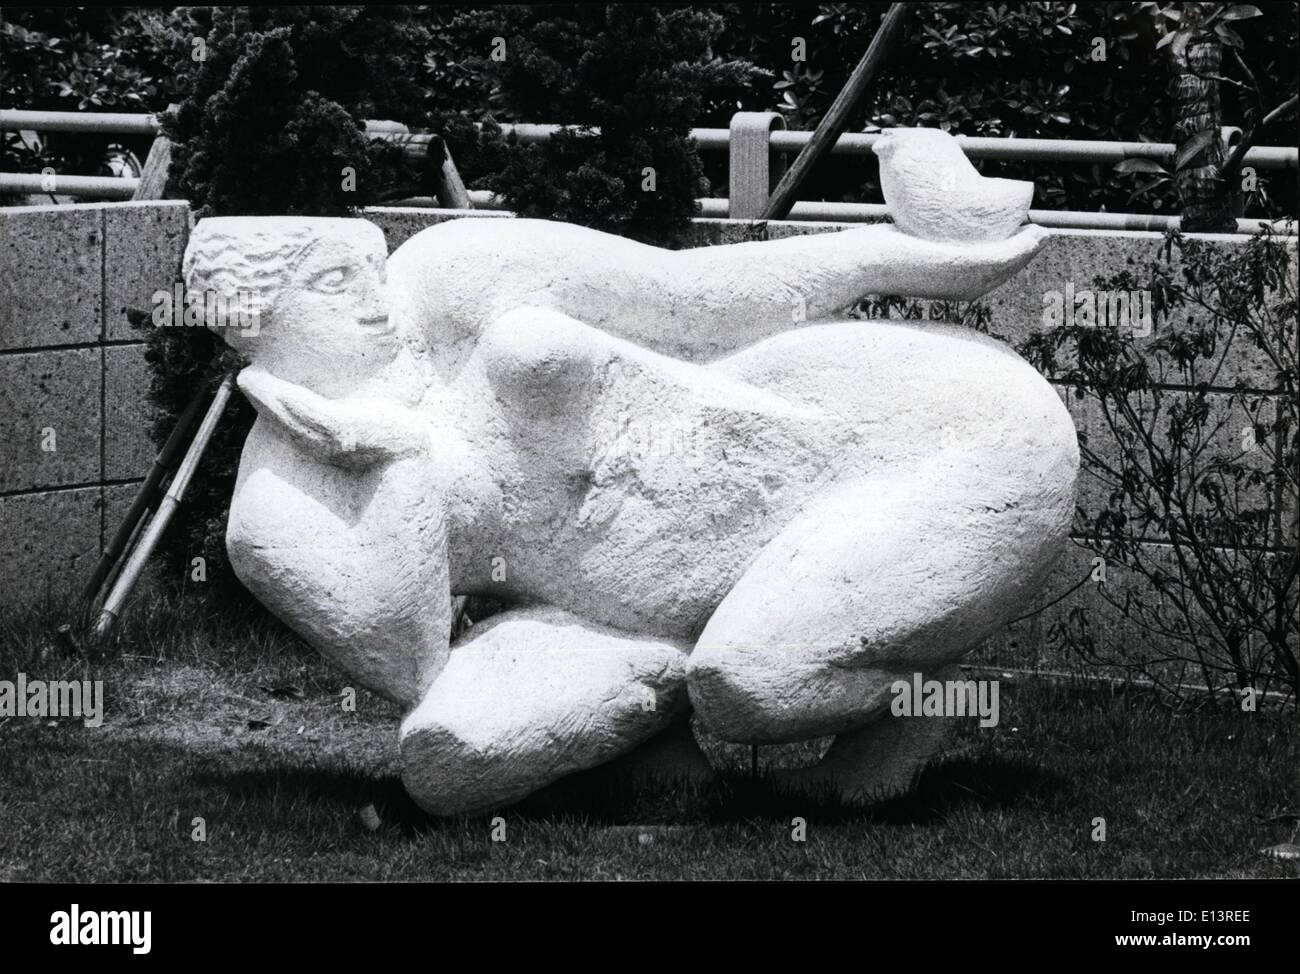 Mar. 27, 2012 - Concrete Art; Japanese sculptors are exhibiting their work created from blocks of white cementin hibiys Park, in the heart of Tokyo this week. Photo Shows Statues of concrete by Japanese Sculptors on public view in the park. Stock Photo